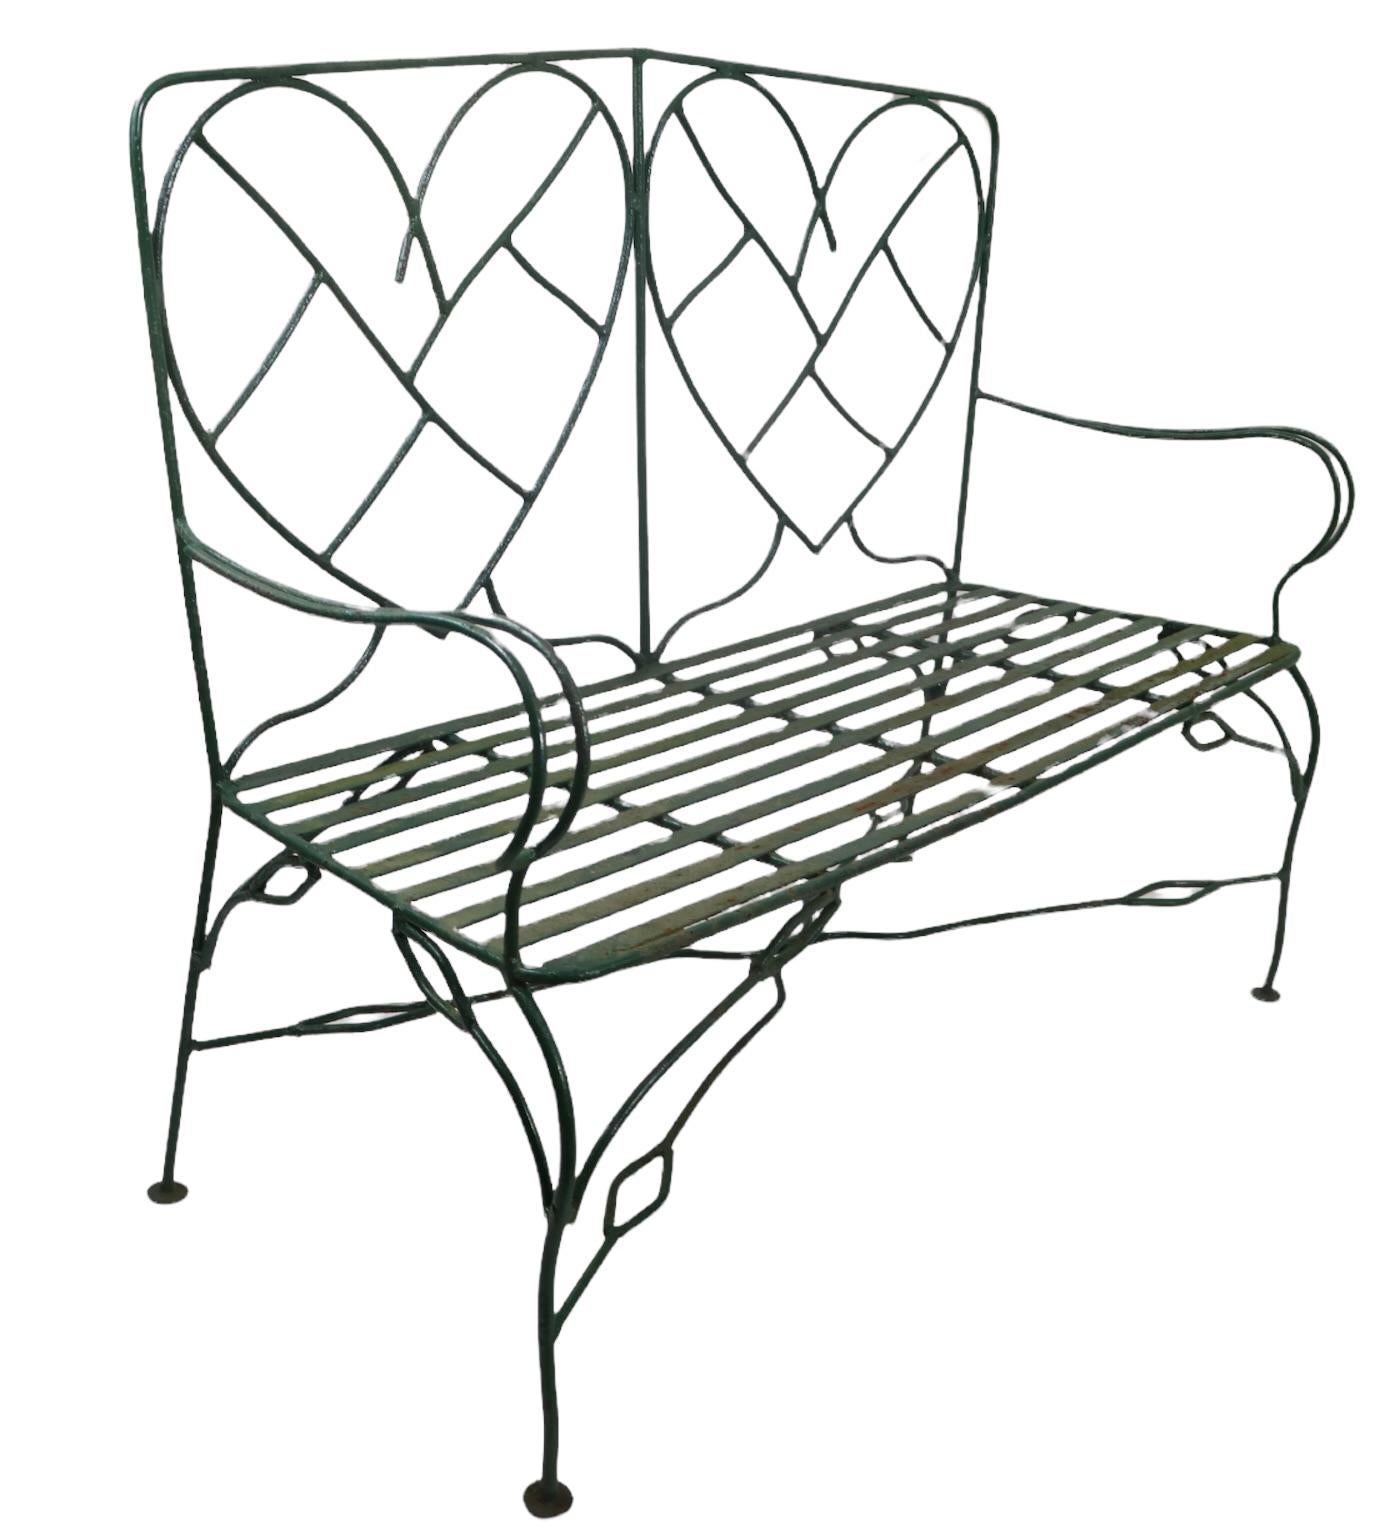 Hand Wrought Iron Settee Bench W Decorative Heart Shaped Metalwork Backrest  3